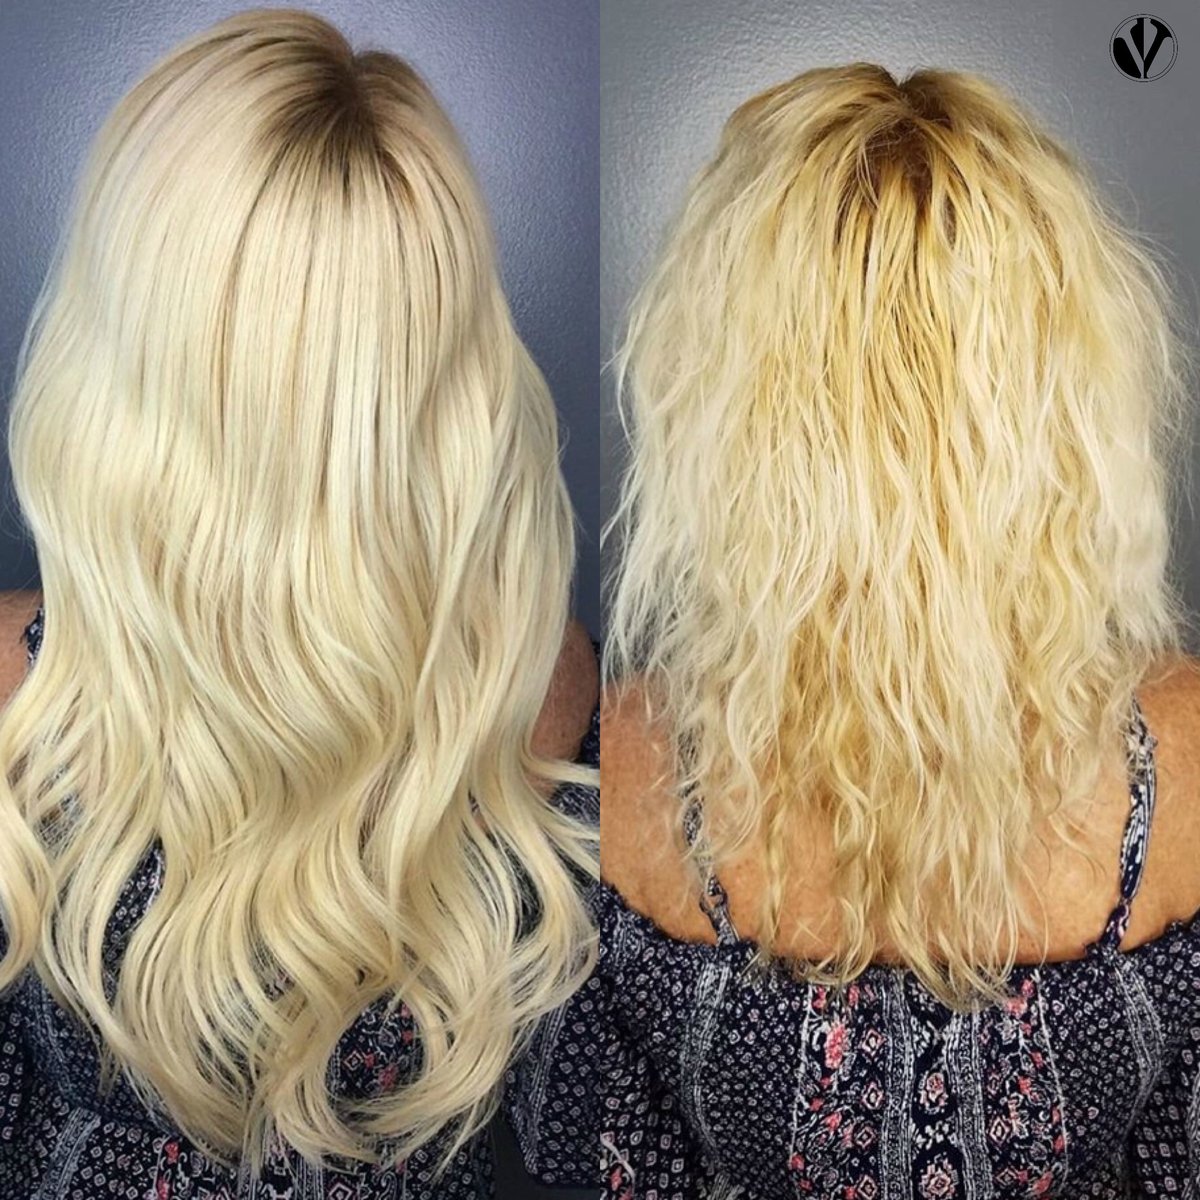 This client came to us with lots of damage from extensions that had been improperly maintained elsewhere. We fixed up her color, extensions, and style to help her achieve her #HealthyHairGoals without compromising the style she desired 😍 #TapeInExtensions by Shells